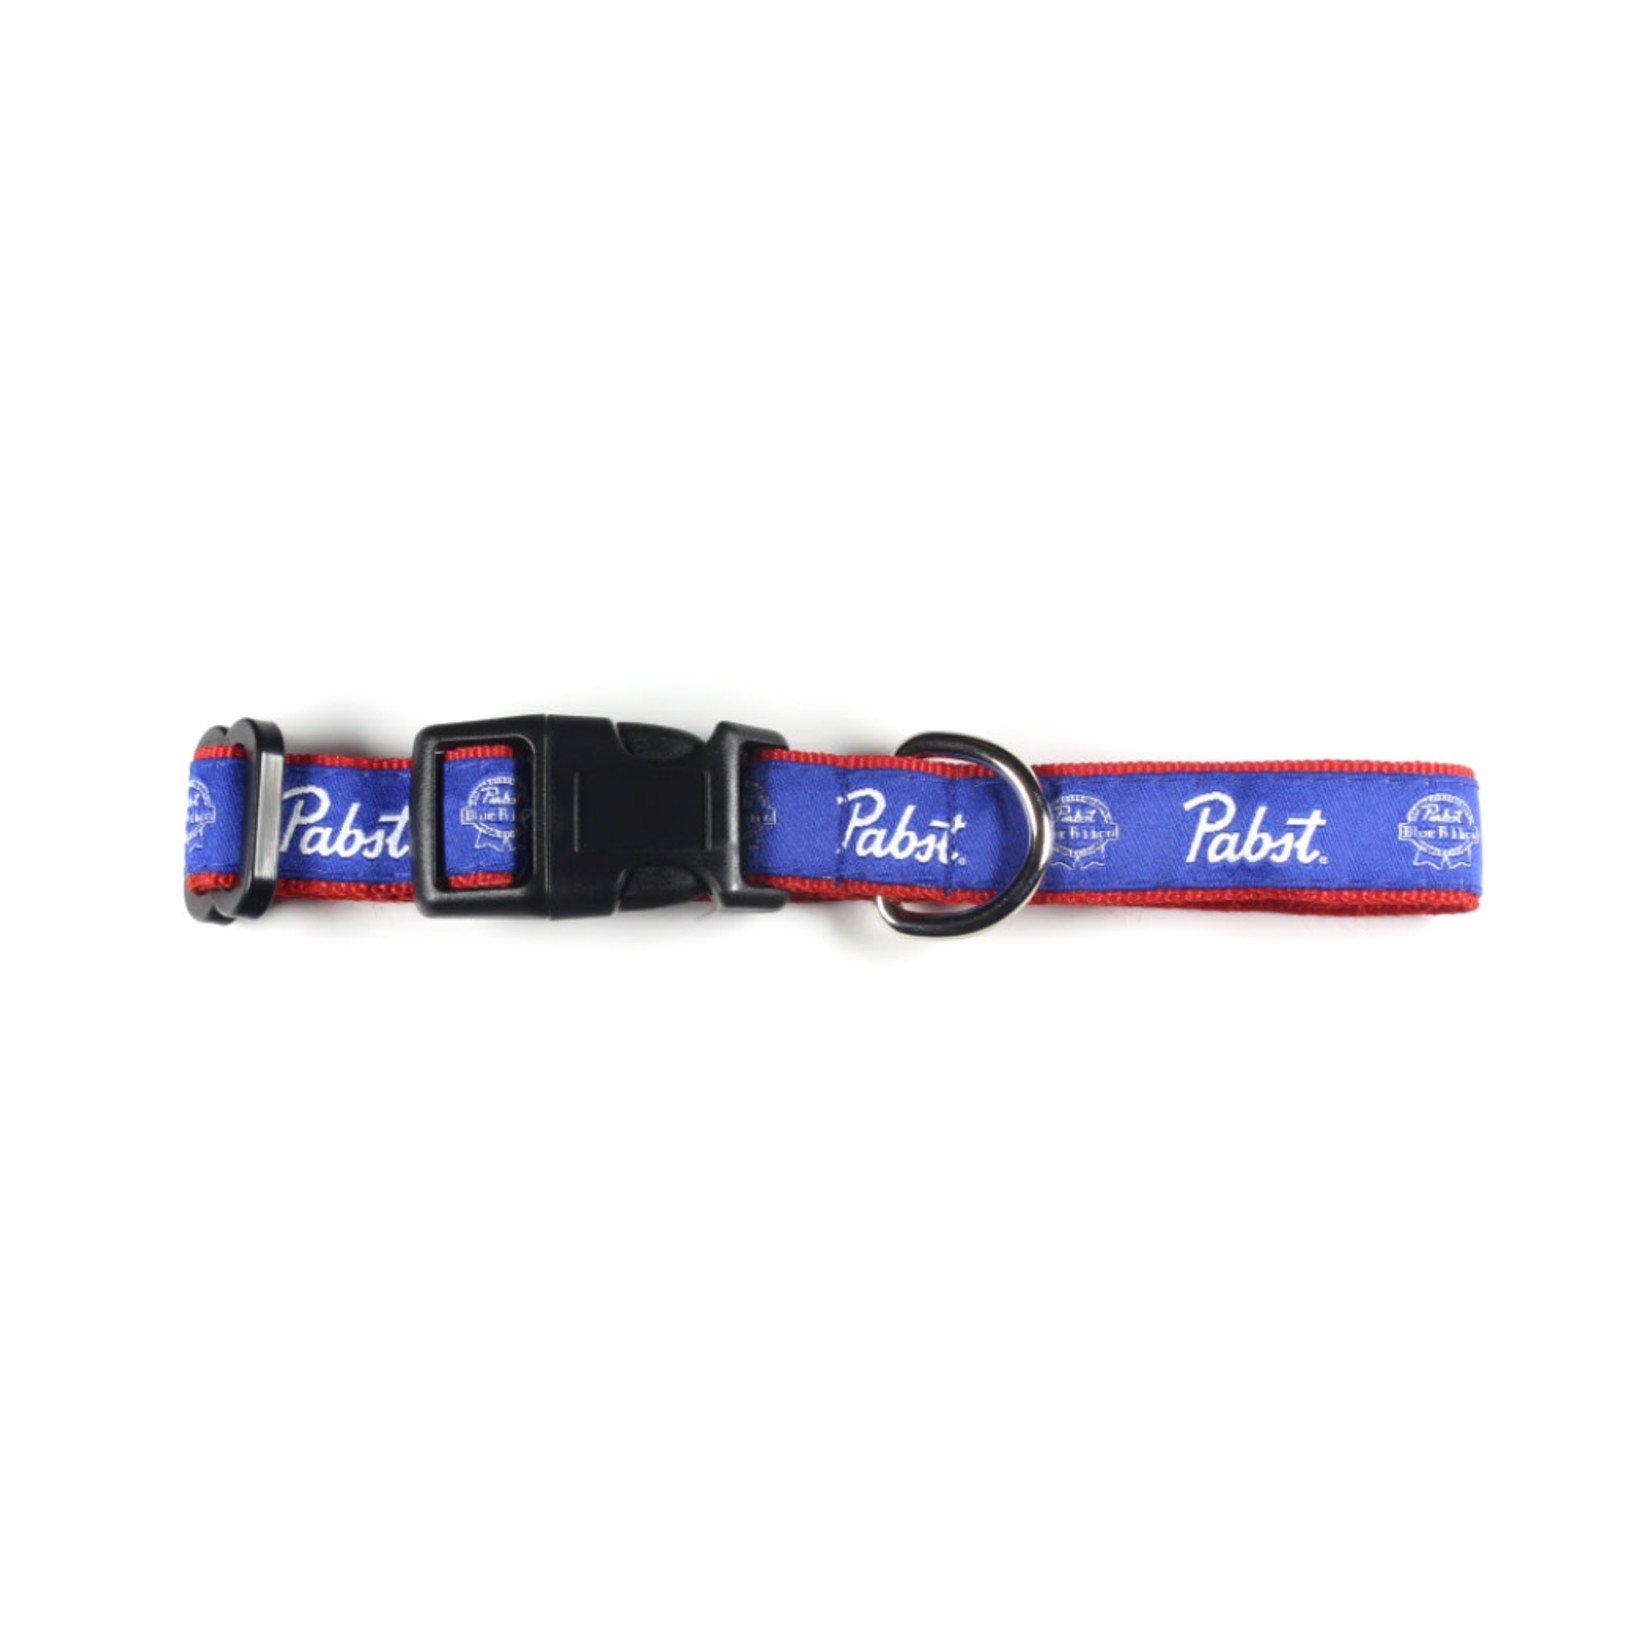 Pabst Pabst Dog Collar